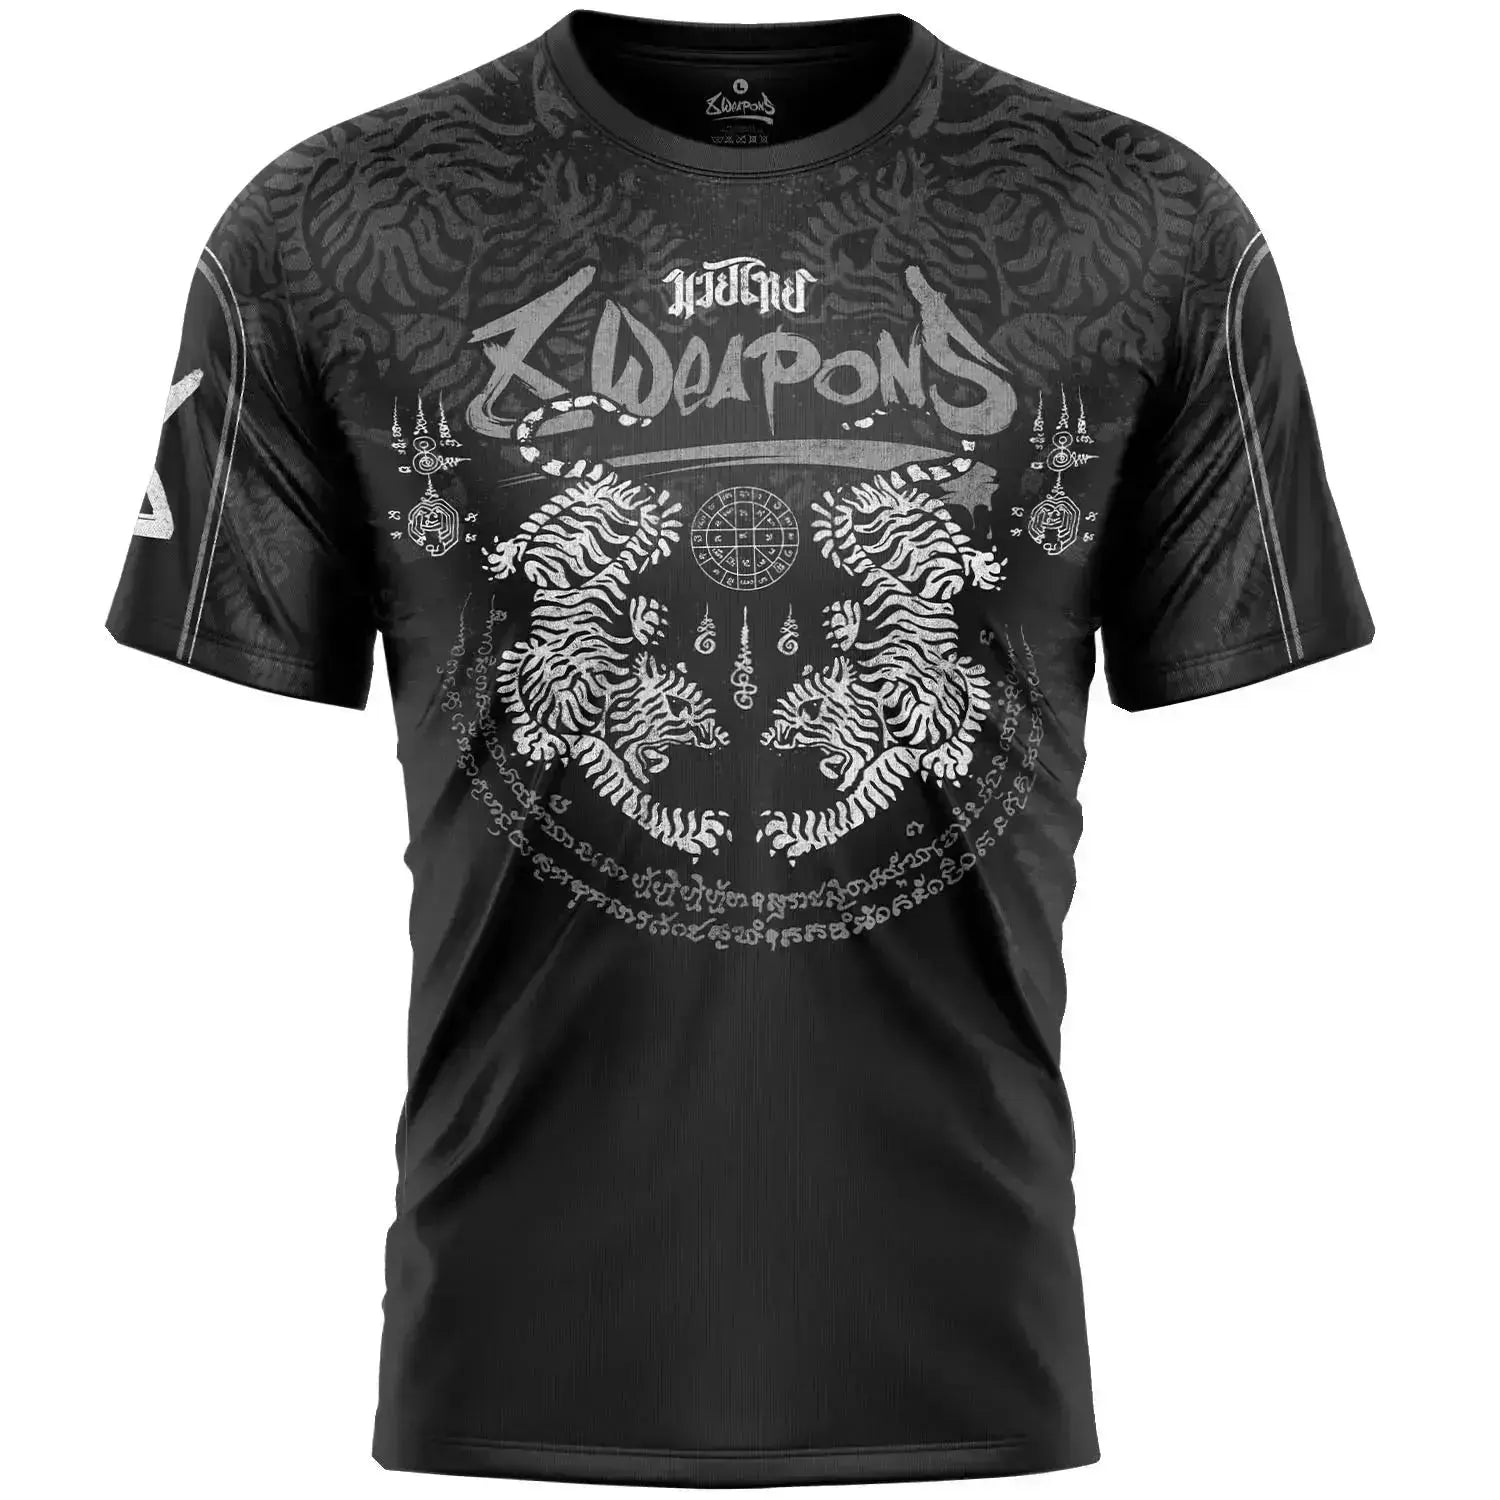 8 WEAPONS Functional T-Shirt - Tiger Yant Black-Grey-XXL Fight Co